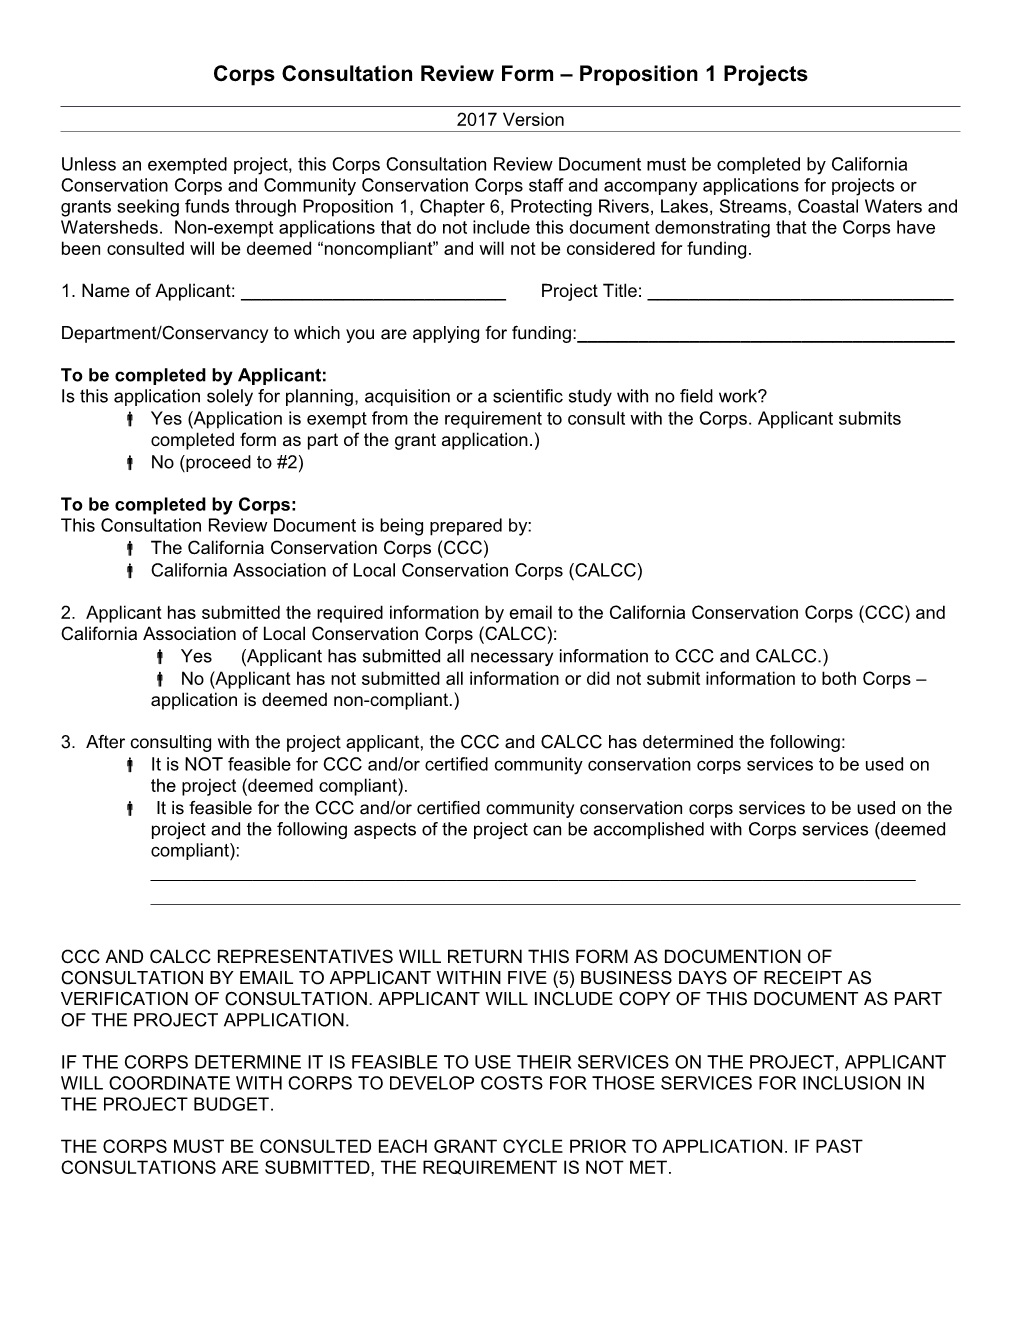 Corps Consultation Review Form Proposition 1 Projects